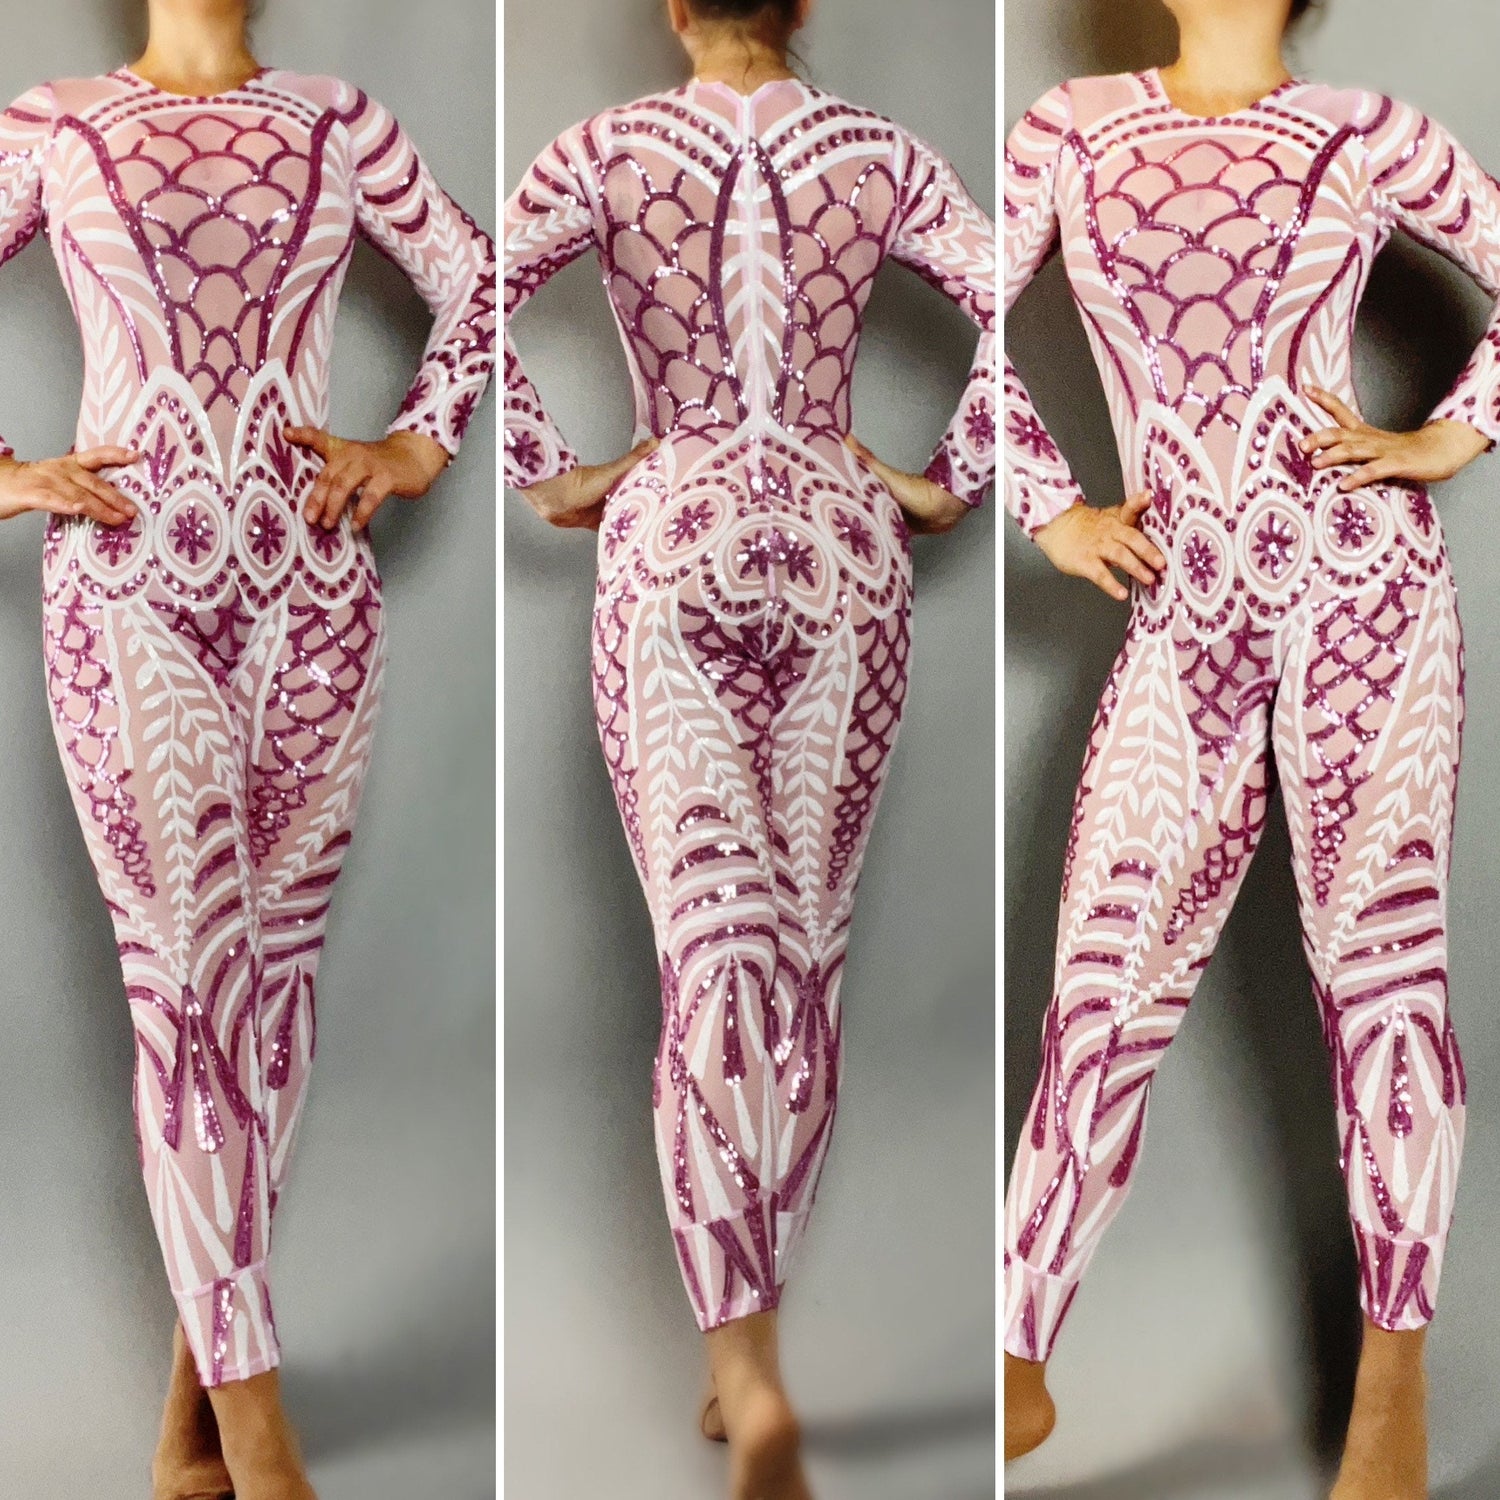 Sequins Jumpsuit, Exotic Dancewear, Sheer Clothing, Festival Fashion, Trending Now, Showgirl Costume